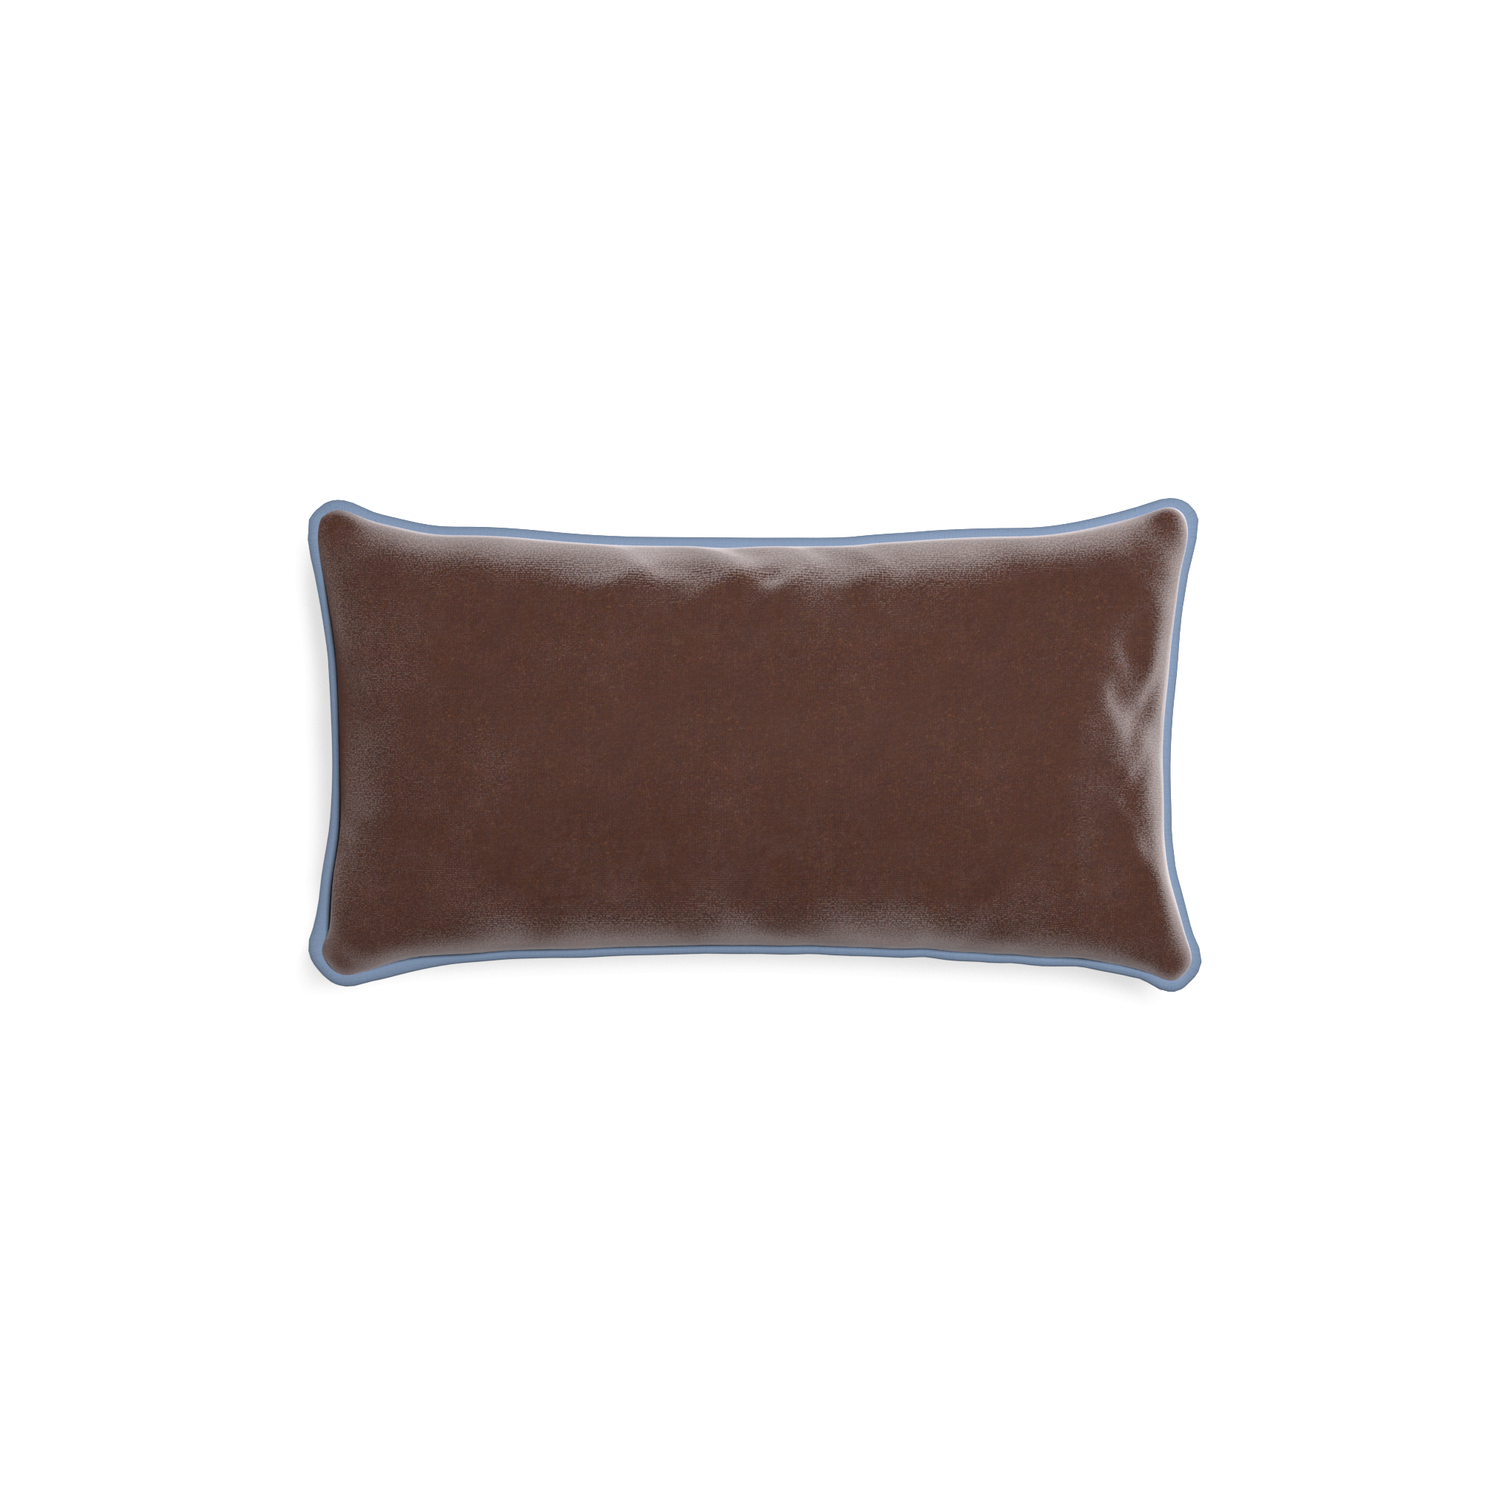 rectangle brown velvet pillow with sky blue piping